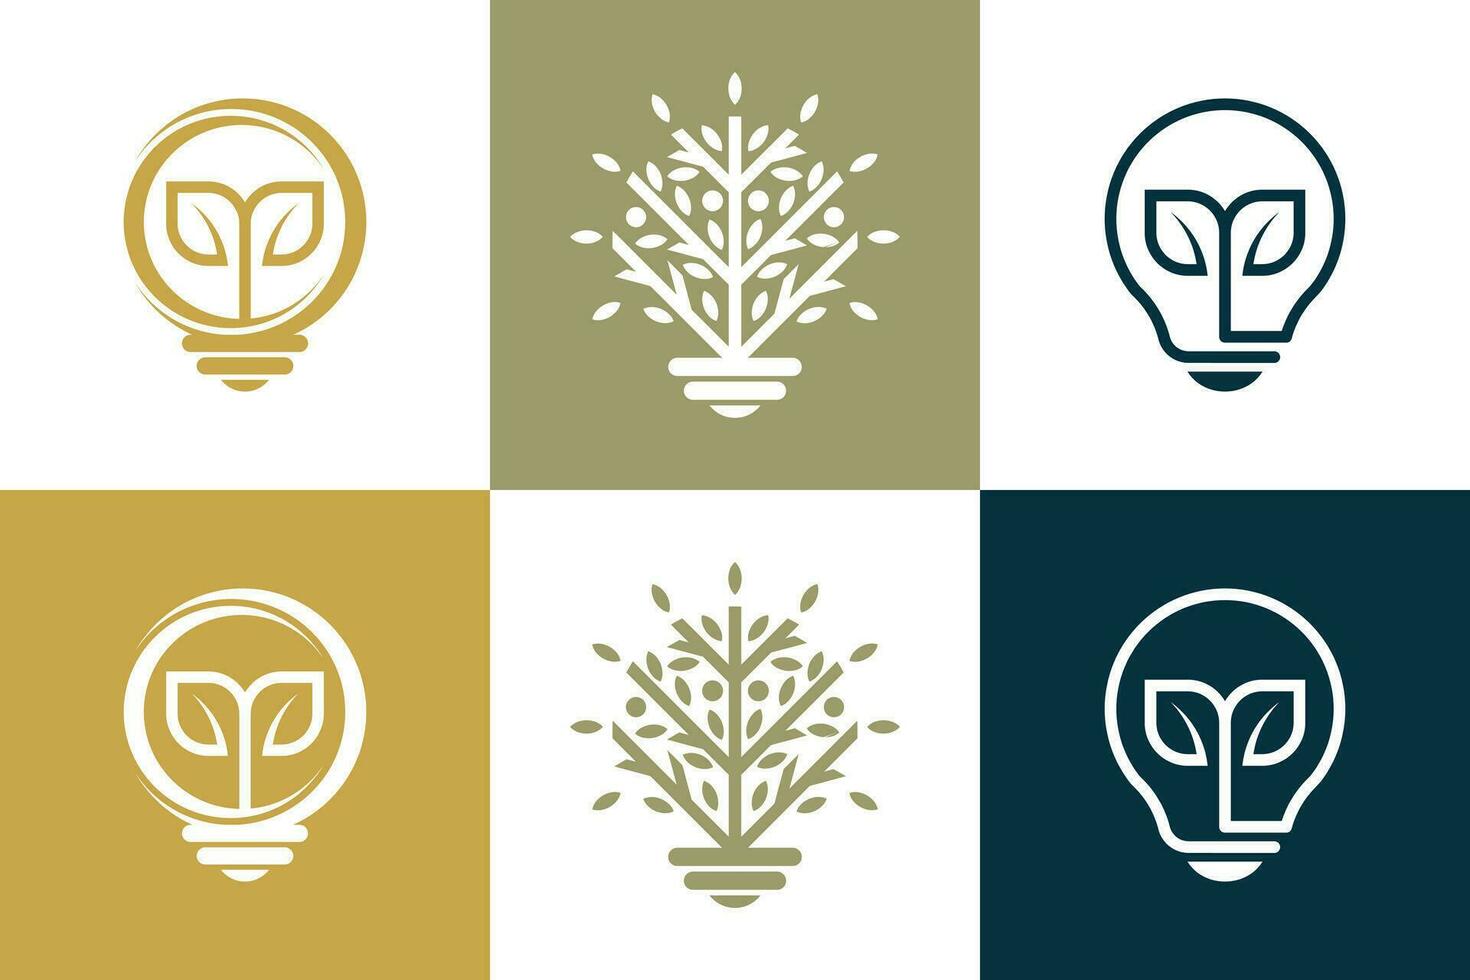 Set of nature and tree logo design vector with creative element concept